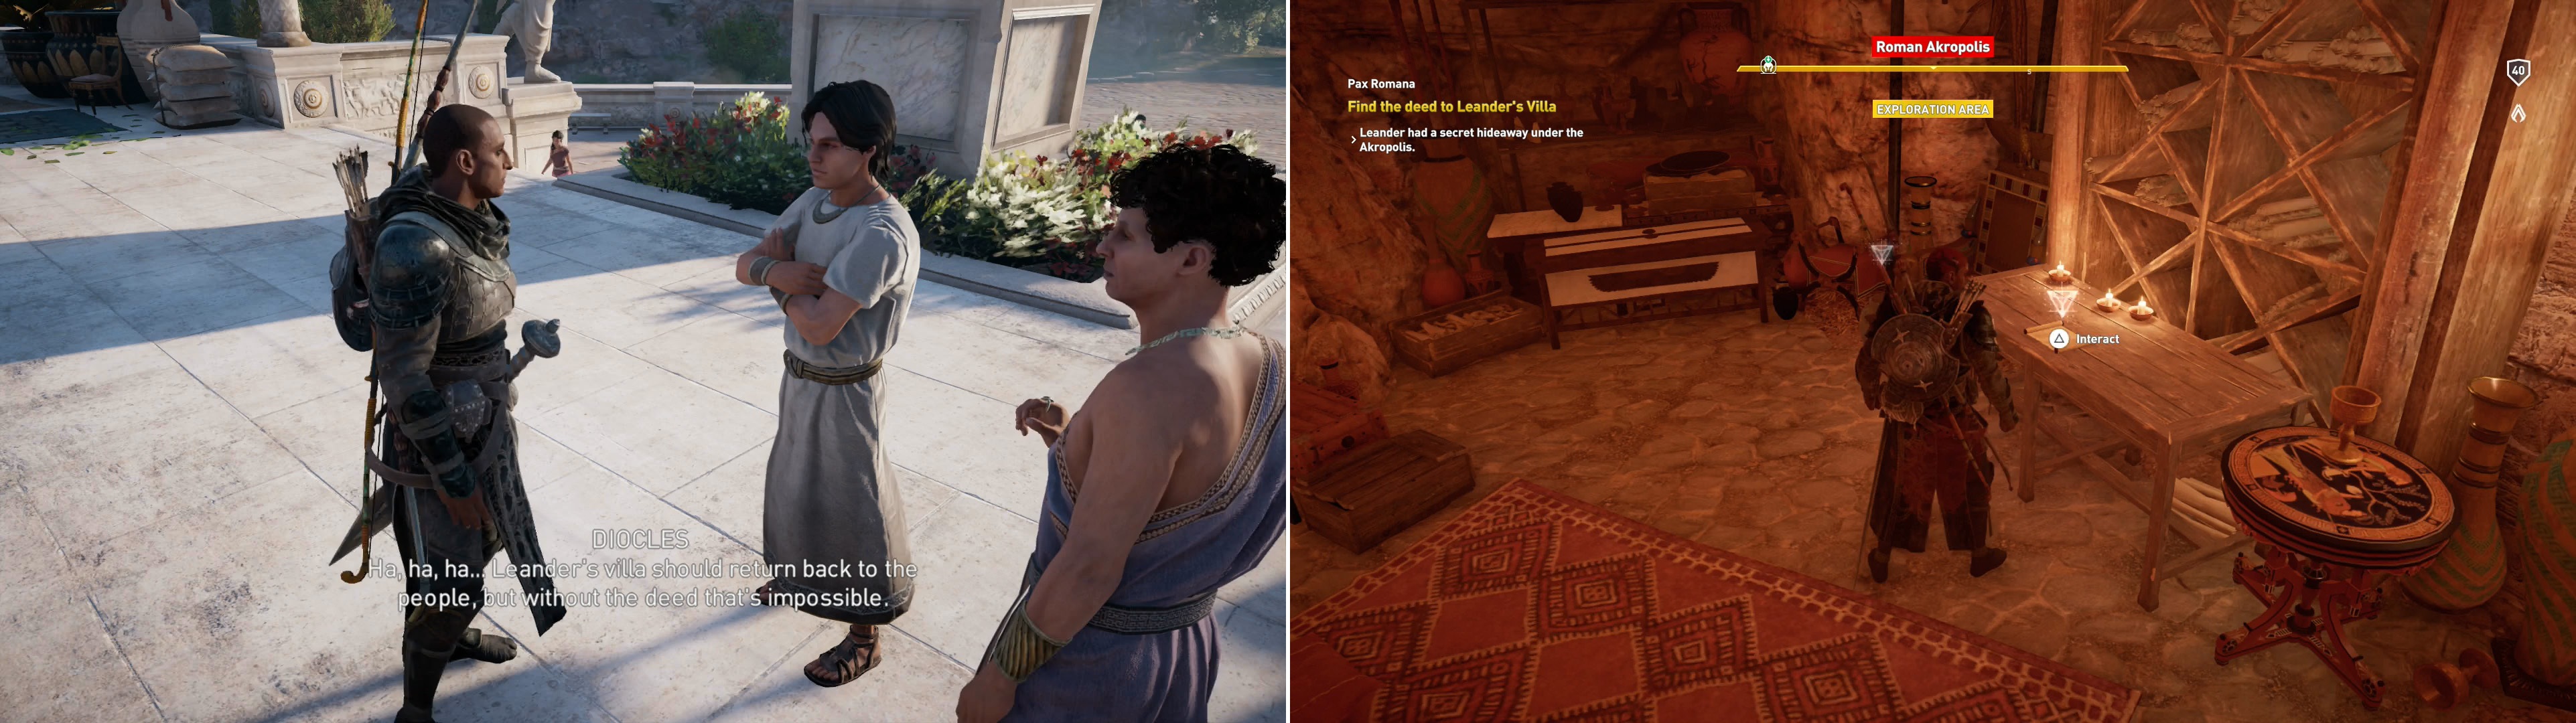 After your victory over Flavius, talk to Diocles, who has more work for Bayek (left), return to the Roman Akropolis and search the underground treasury to find the deed Diocles wants (right).